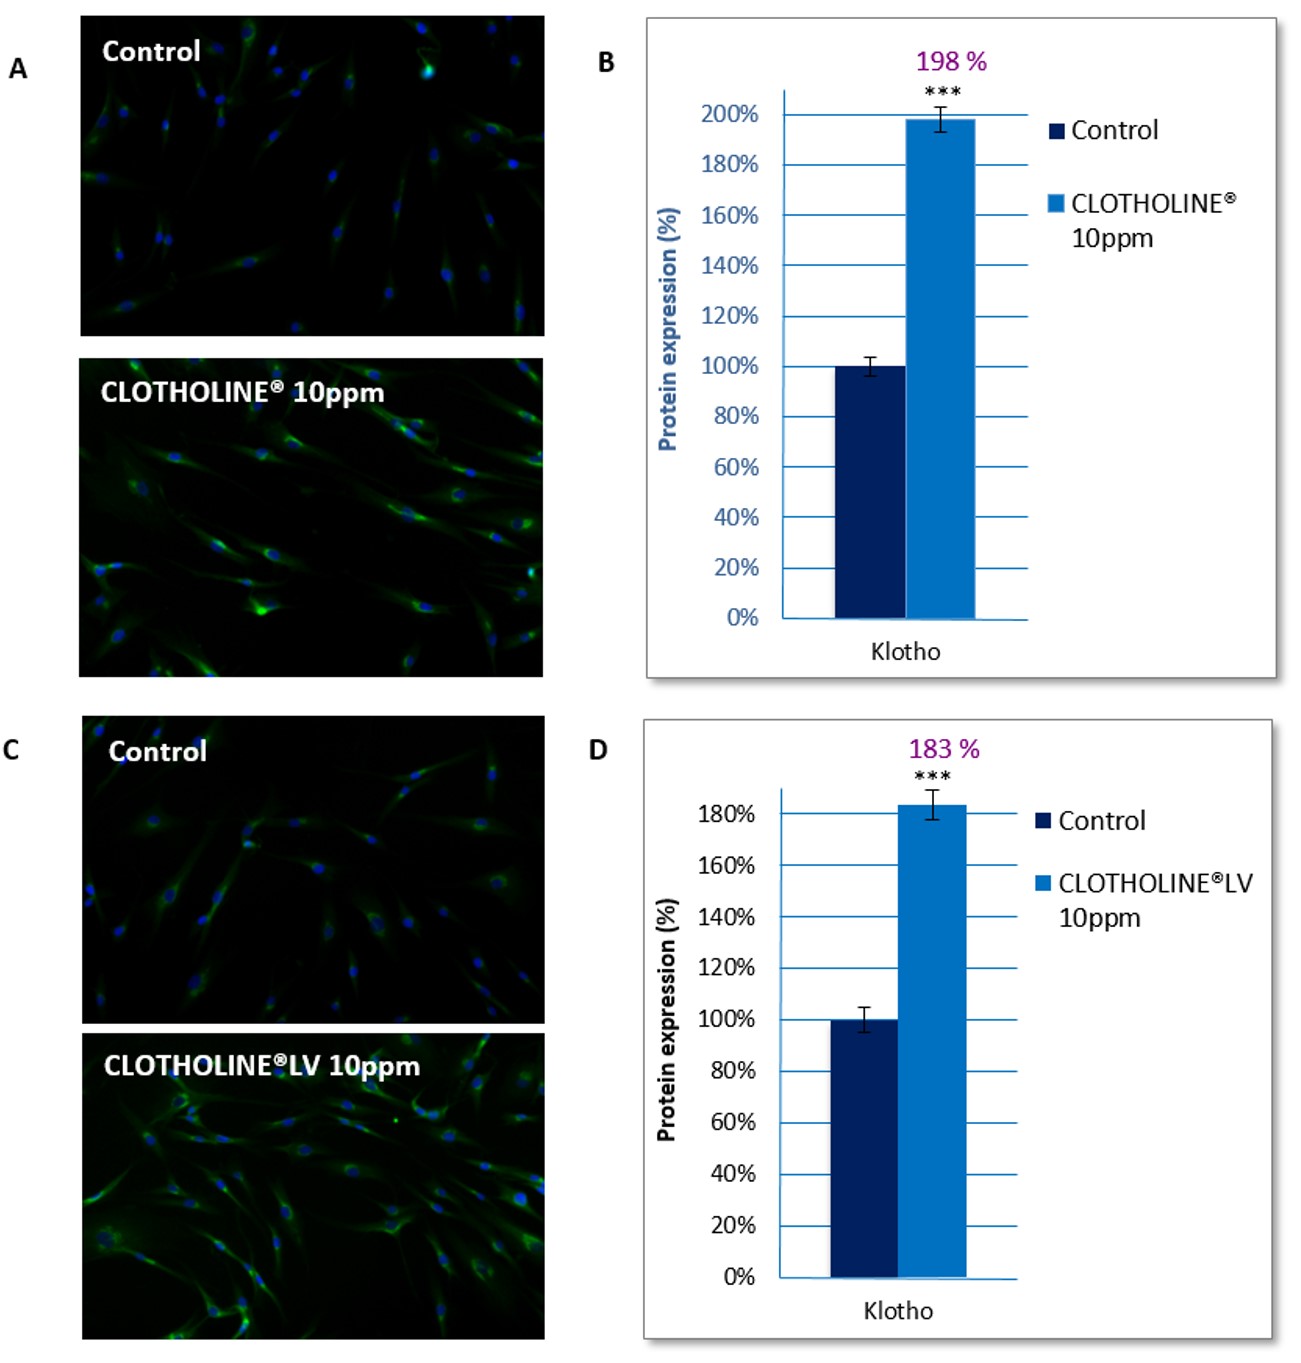 Clotholine vs Clotholine LV natural cosmetic ingredient comparison on the expression of Klotho protein measured by automated microscopy arrayscan cellomics